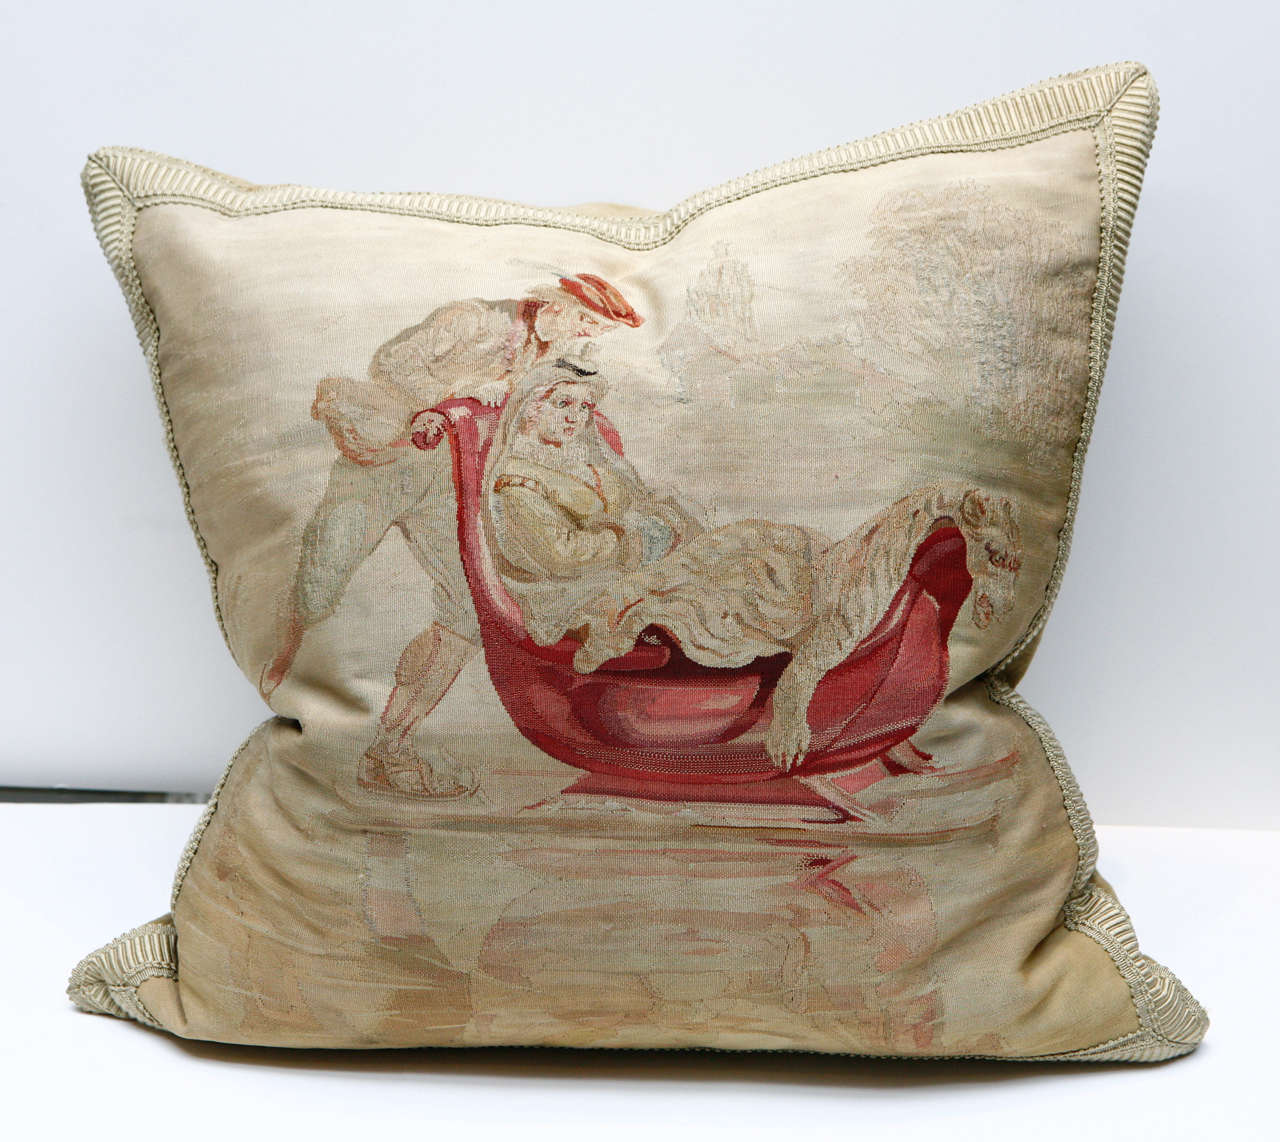 Large Aubusson pillow with a scene showing a reclining woman covered with an animal skin throw in a sled being pushed by man.